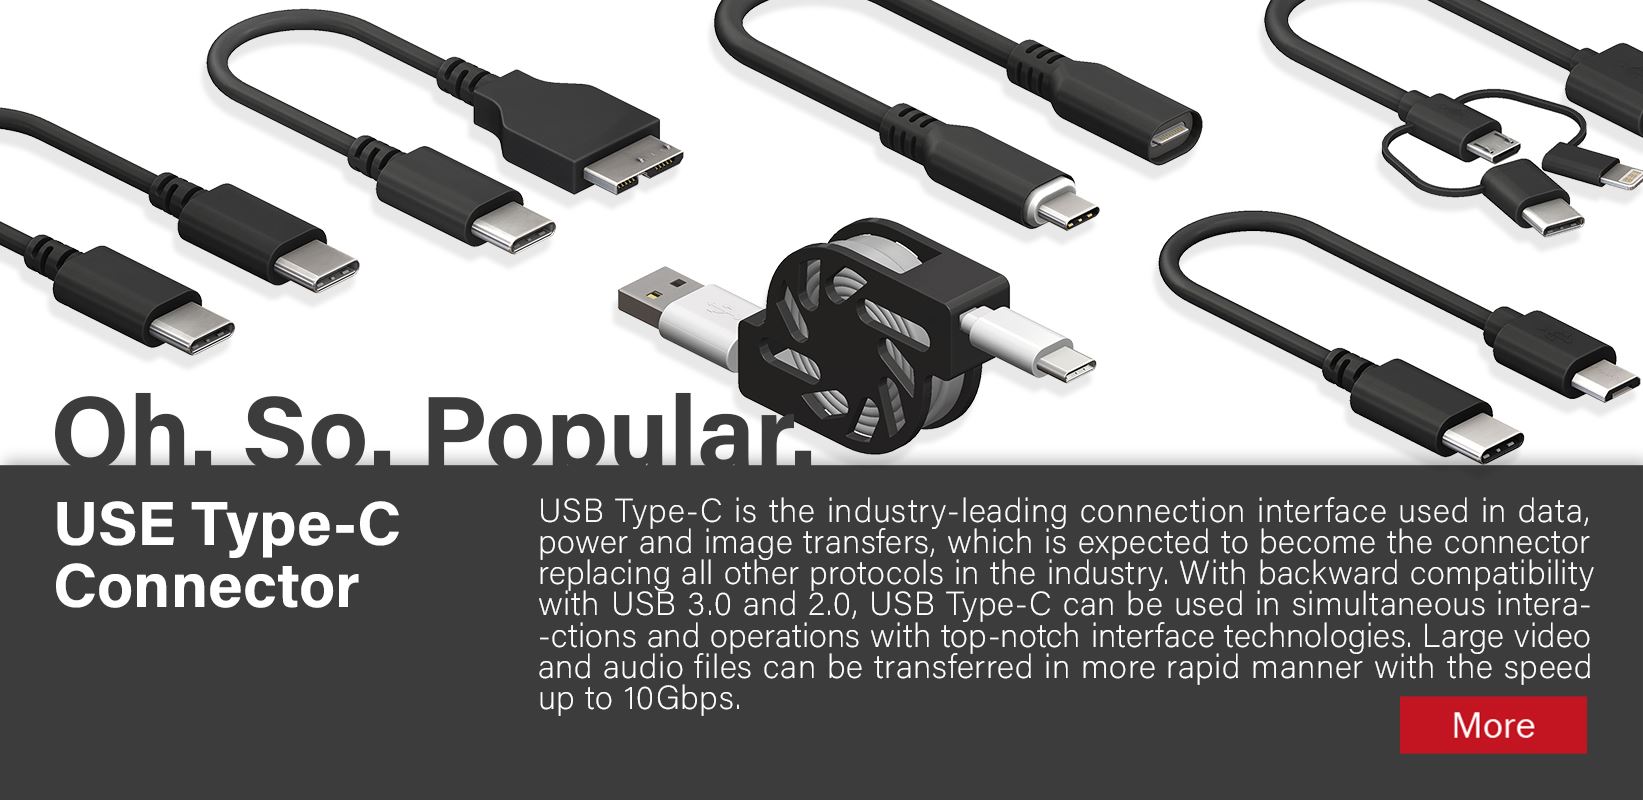 Oh. So. Popular. USE Type-C Connector